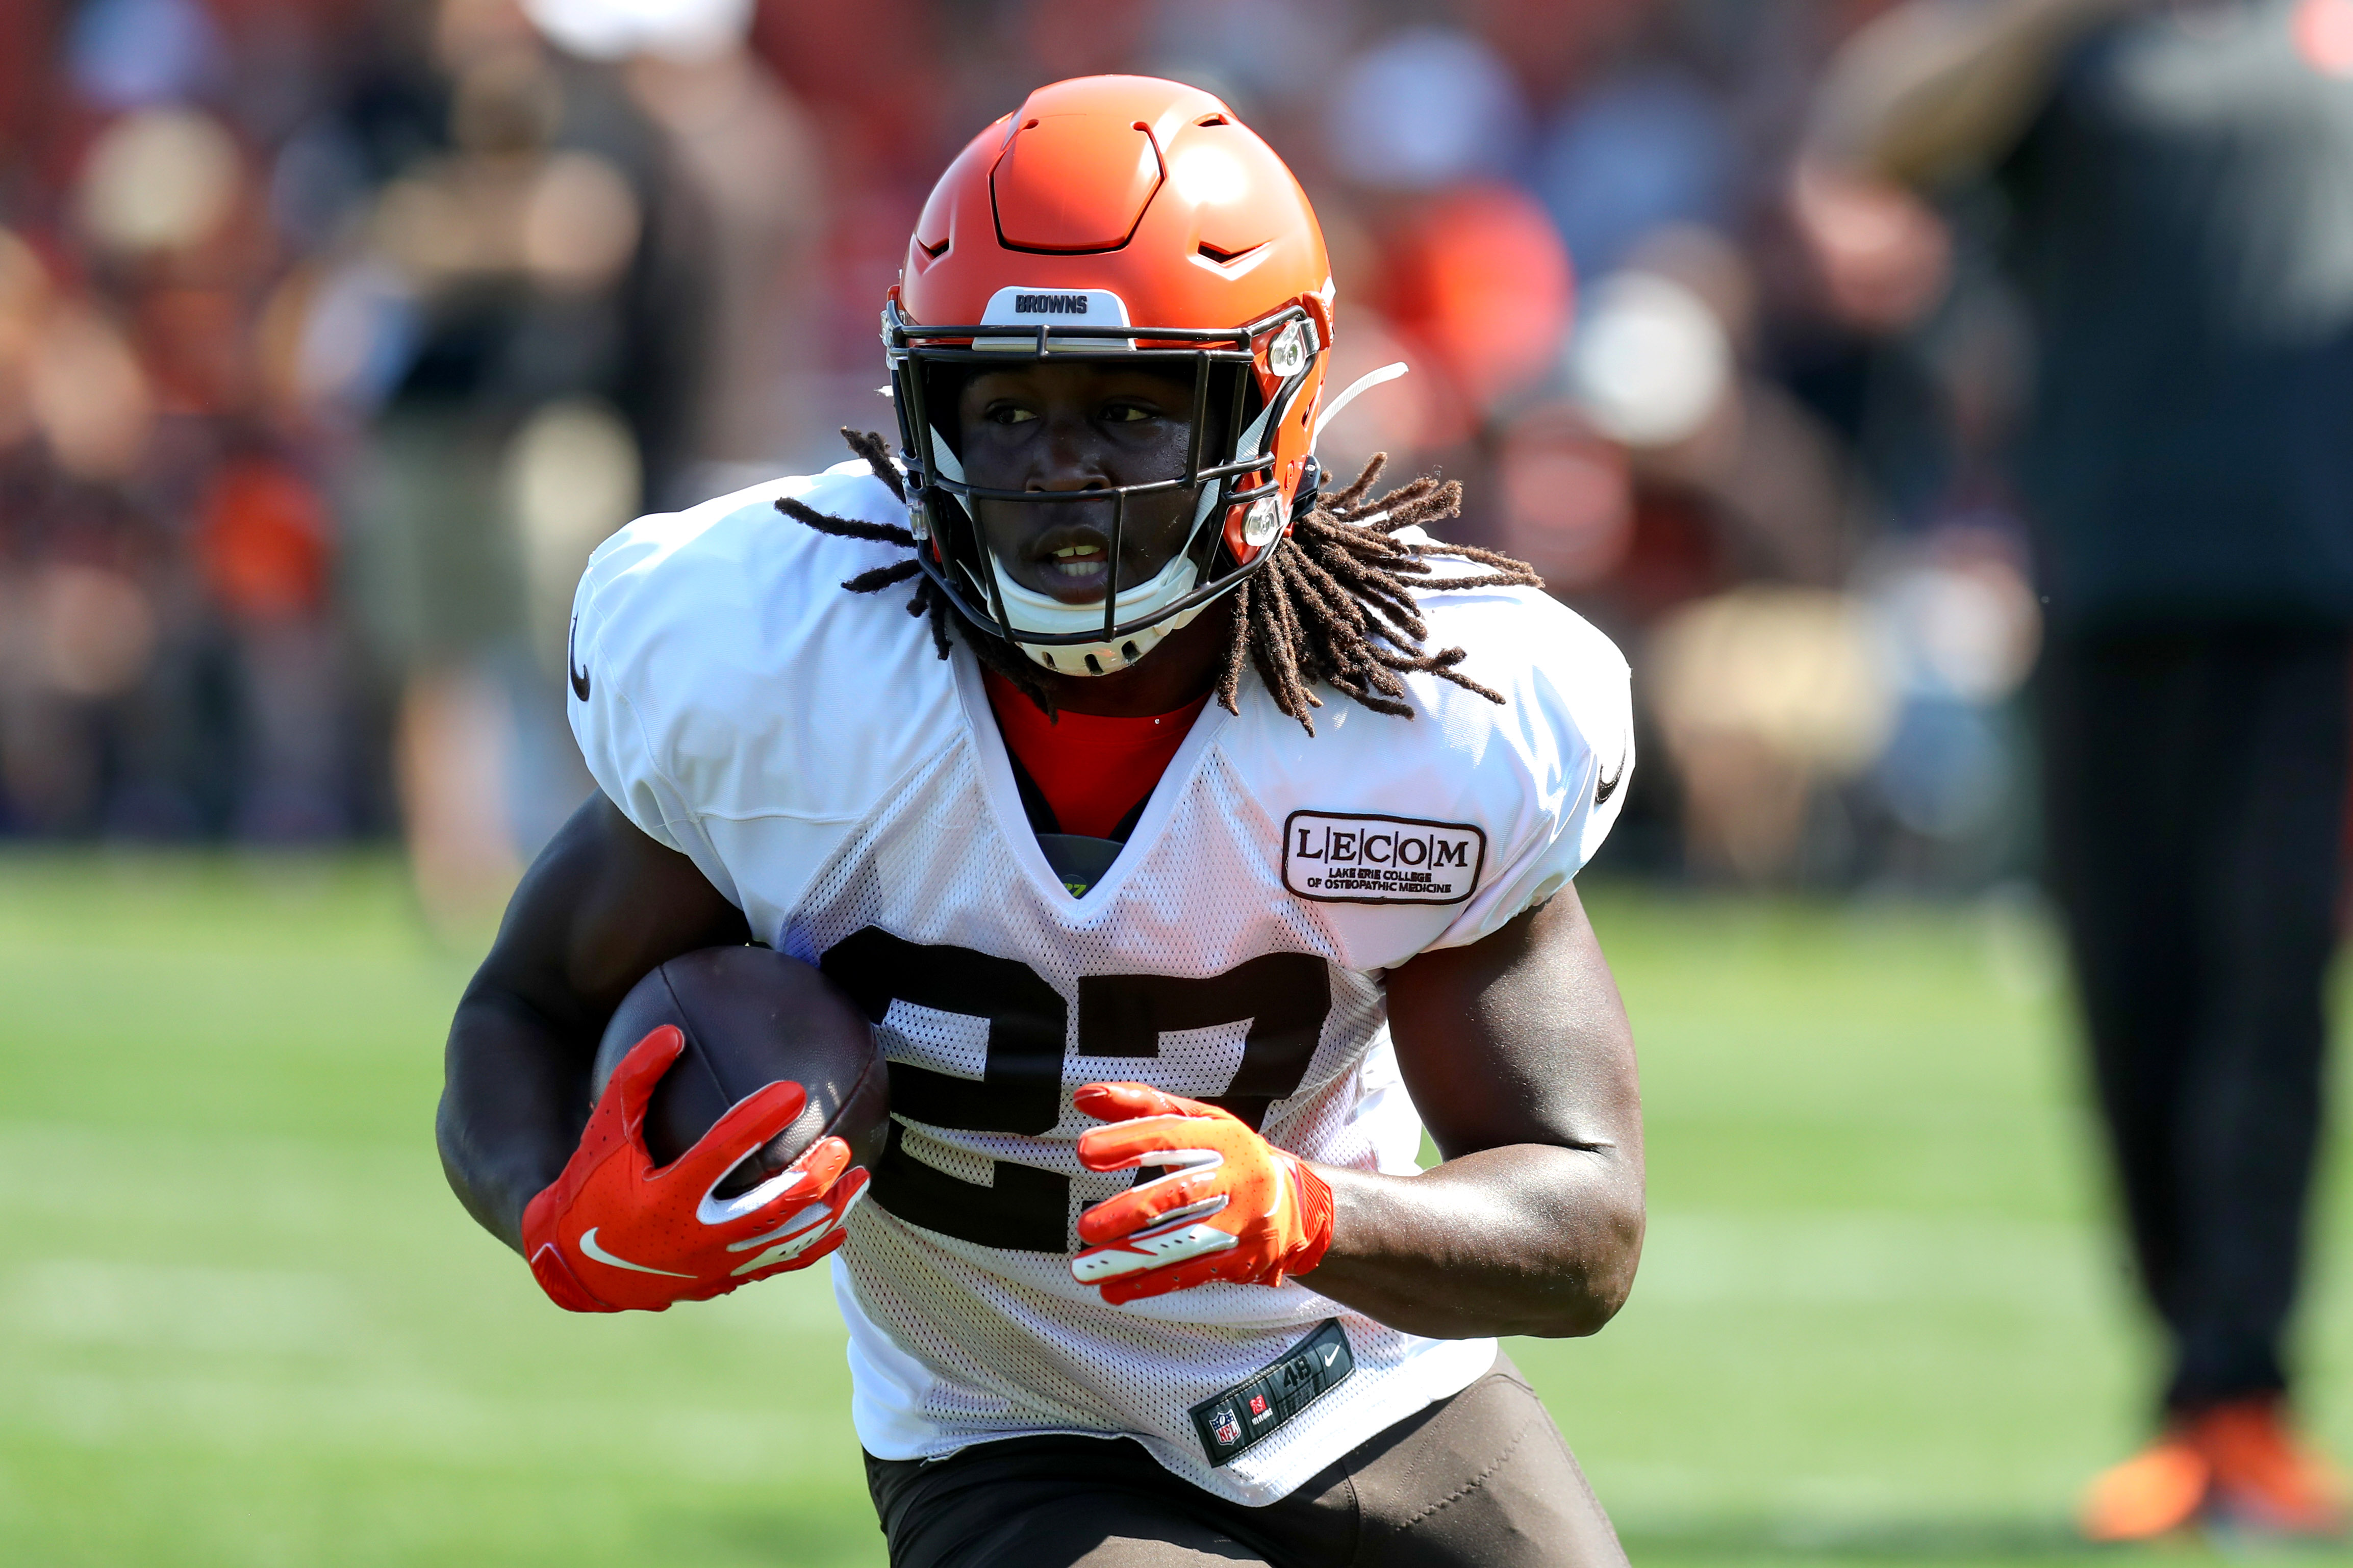 Kareem Hunt Begins Practicing In Cleveland Myopic Browns Fans Have Many Sizzling Hot Takes 0798